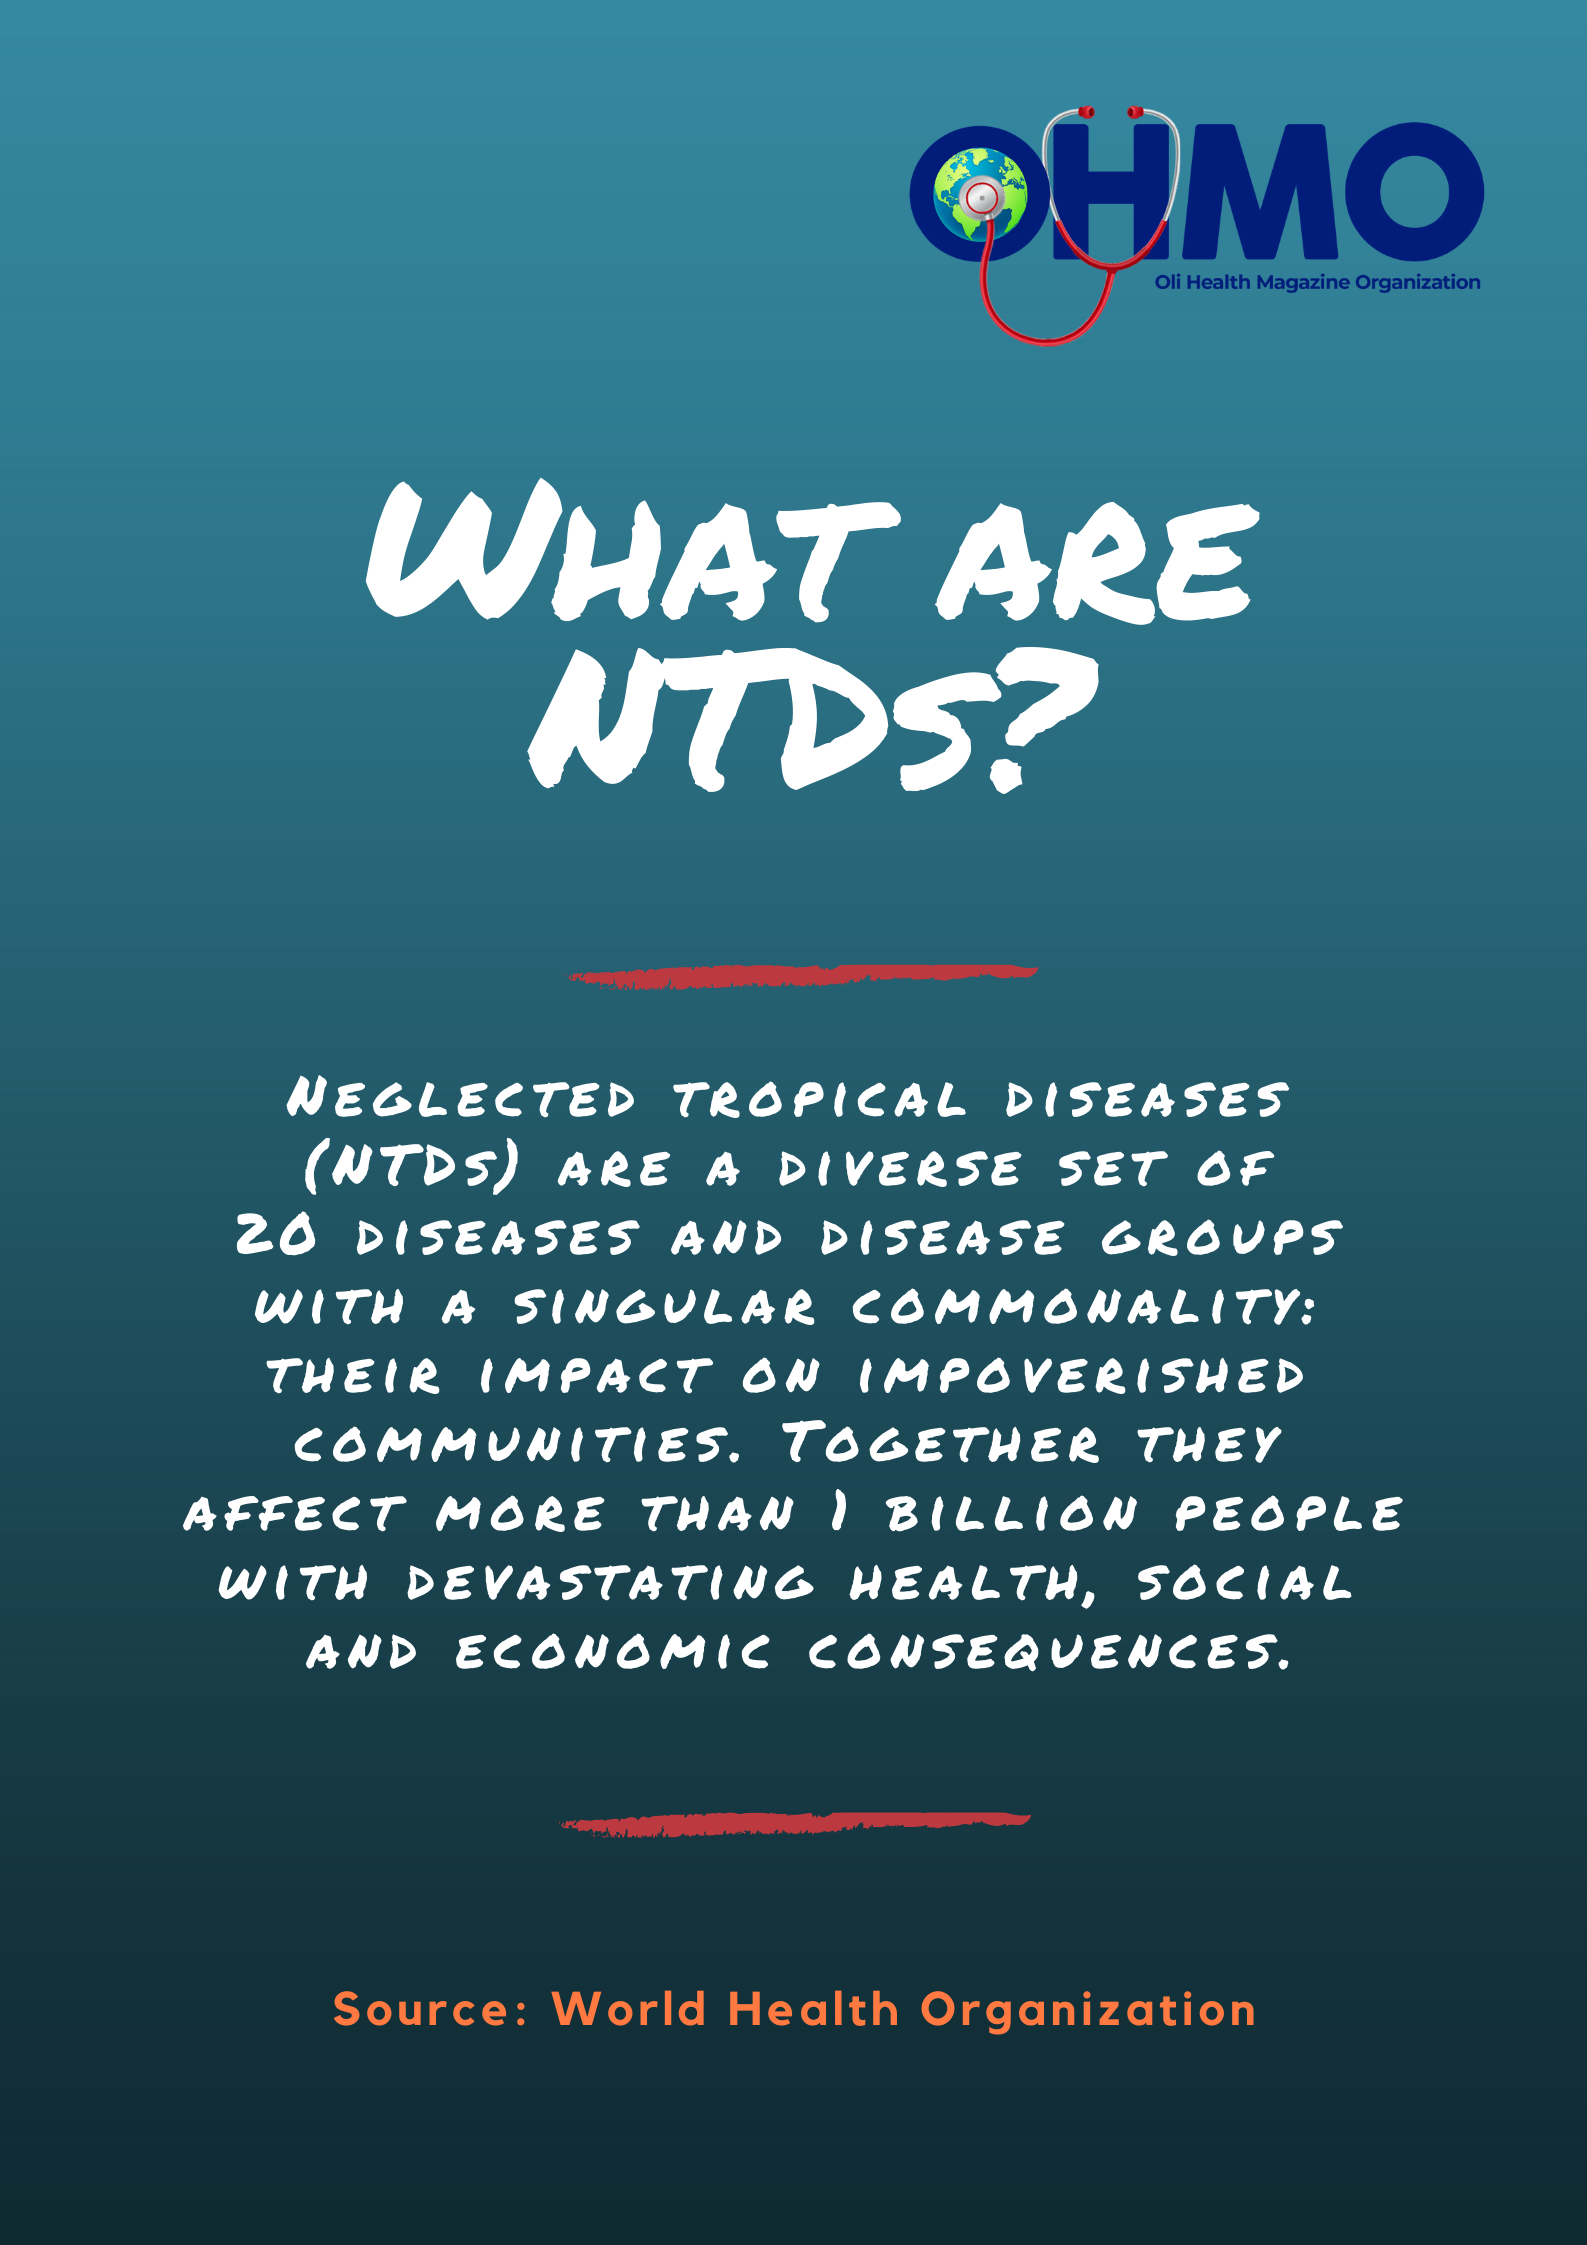 What You Need To Know About Neglected Tropical Diseases (NTDs)